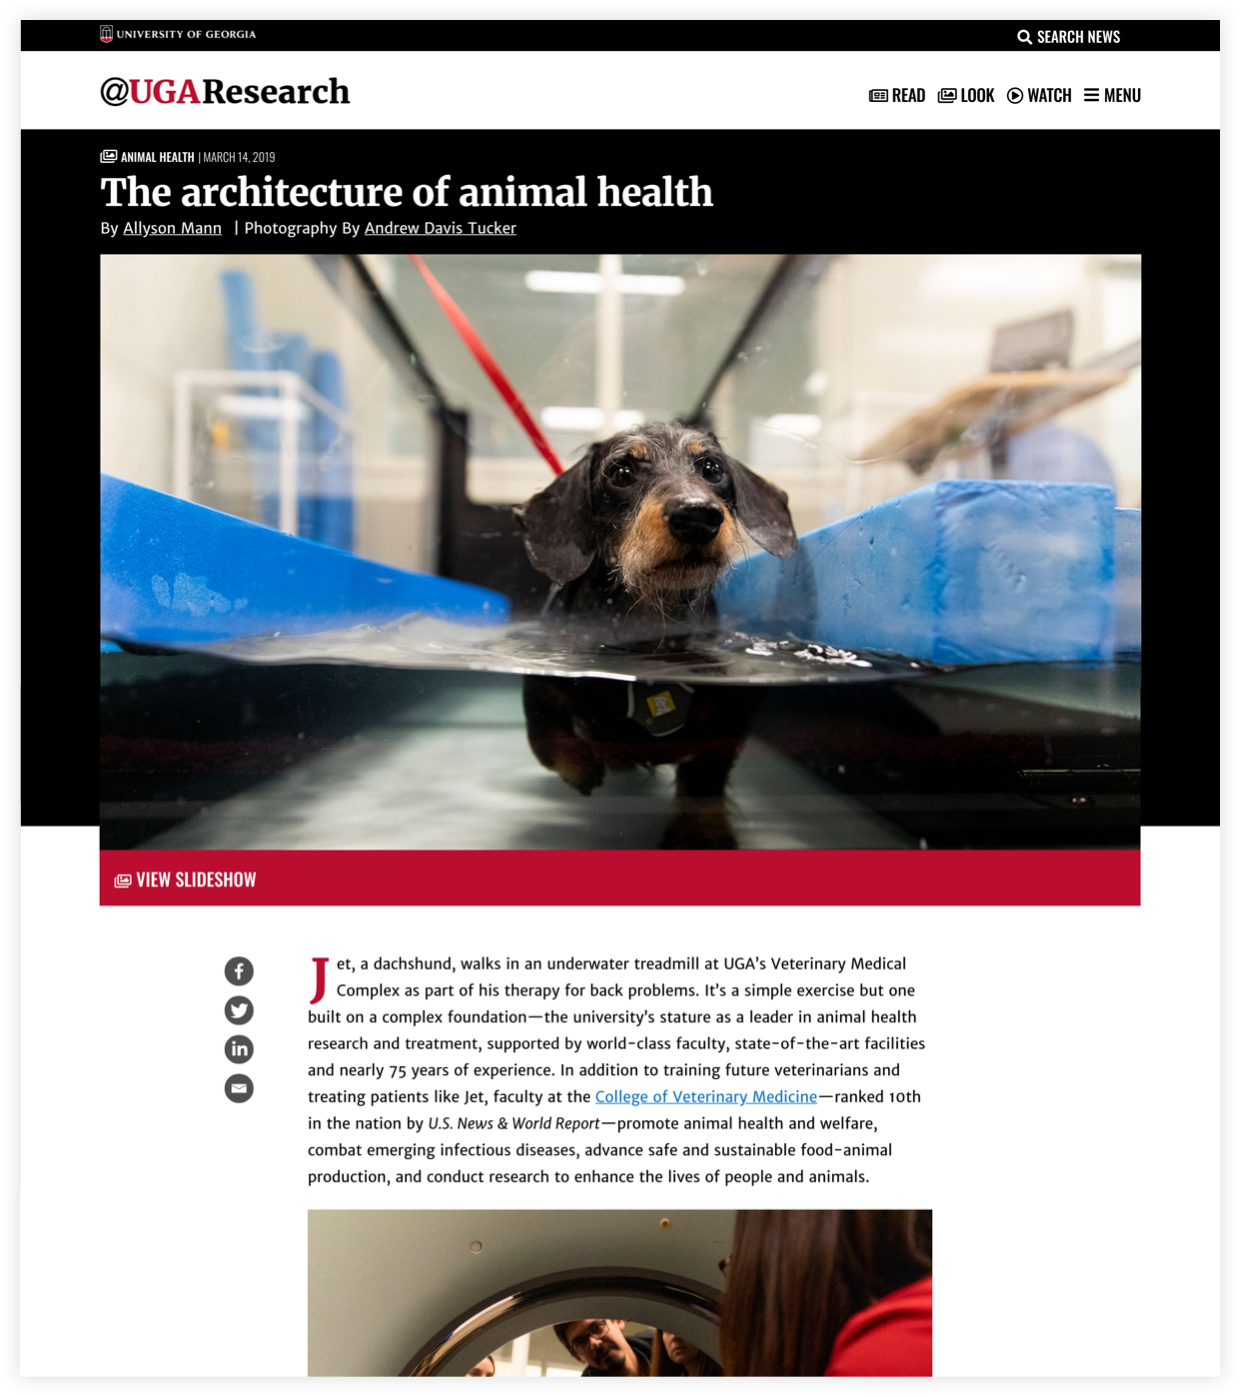 UGA Research News LOOK page with featured Look posts and latest Look posts